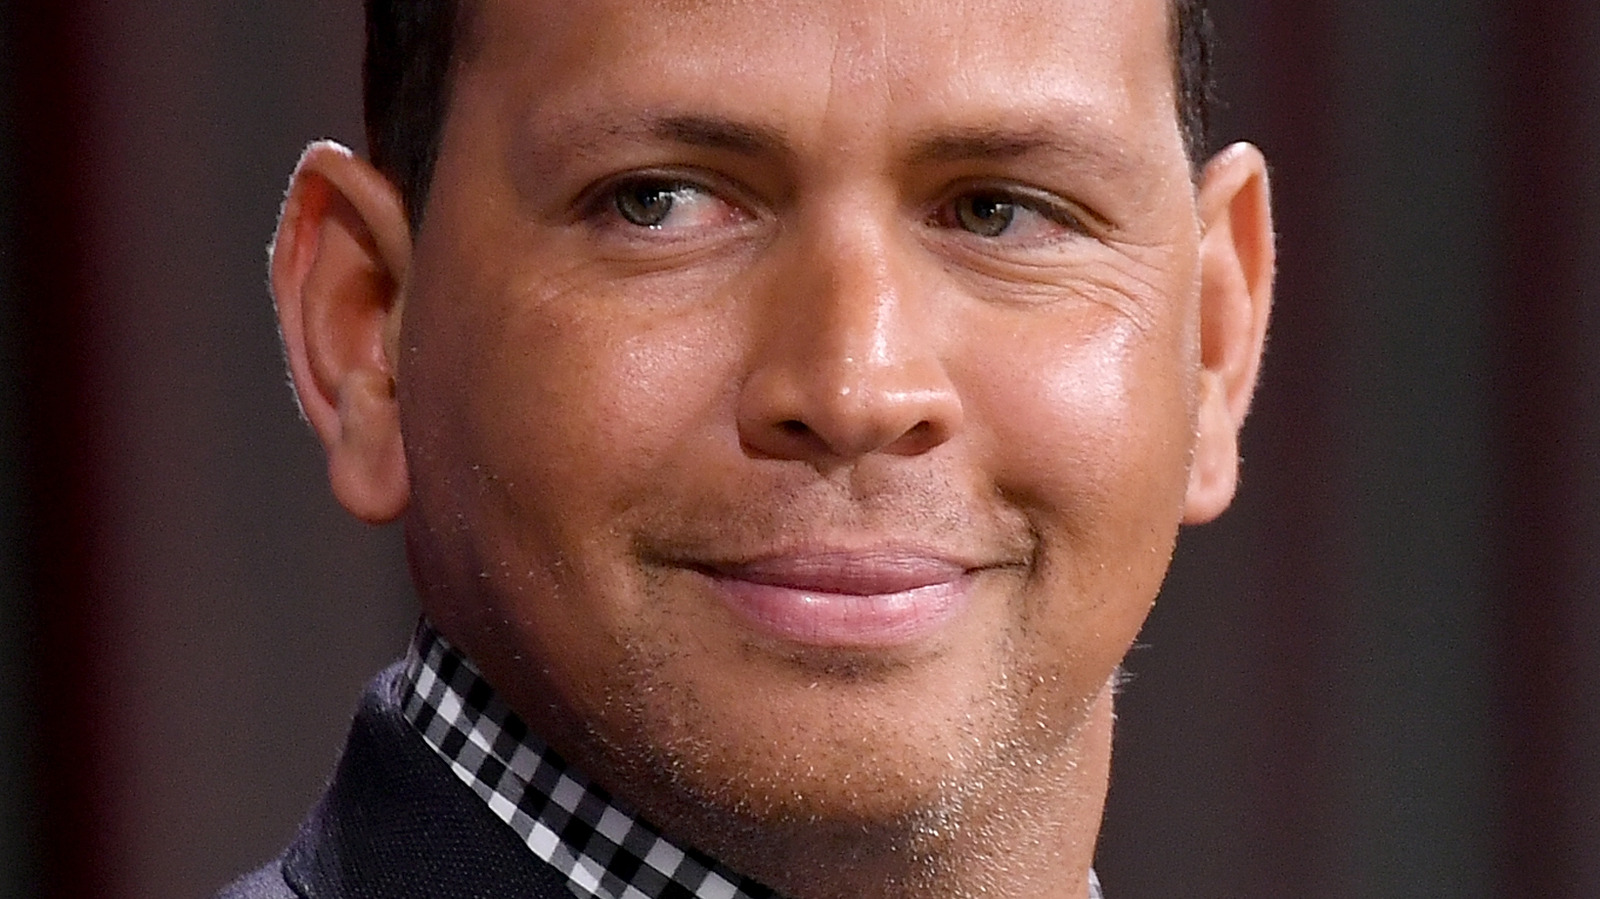 Alex Rodriguez’s Relationship With His Younger Girlfriend Appears To Be Heating Up